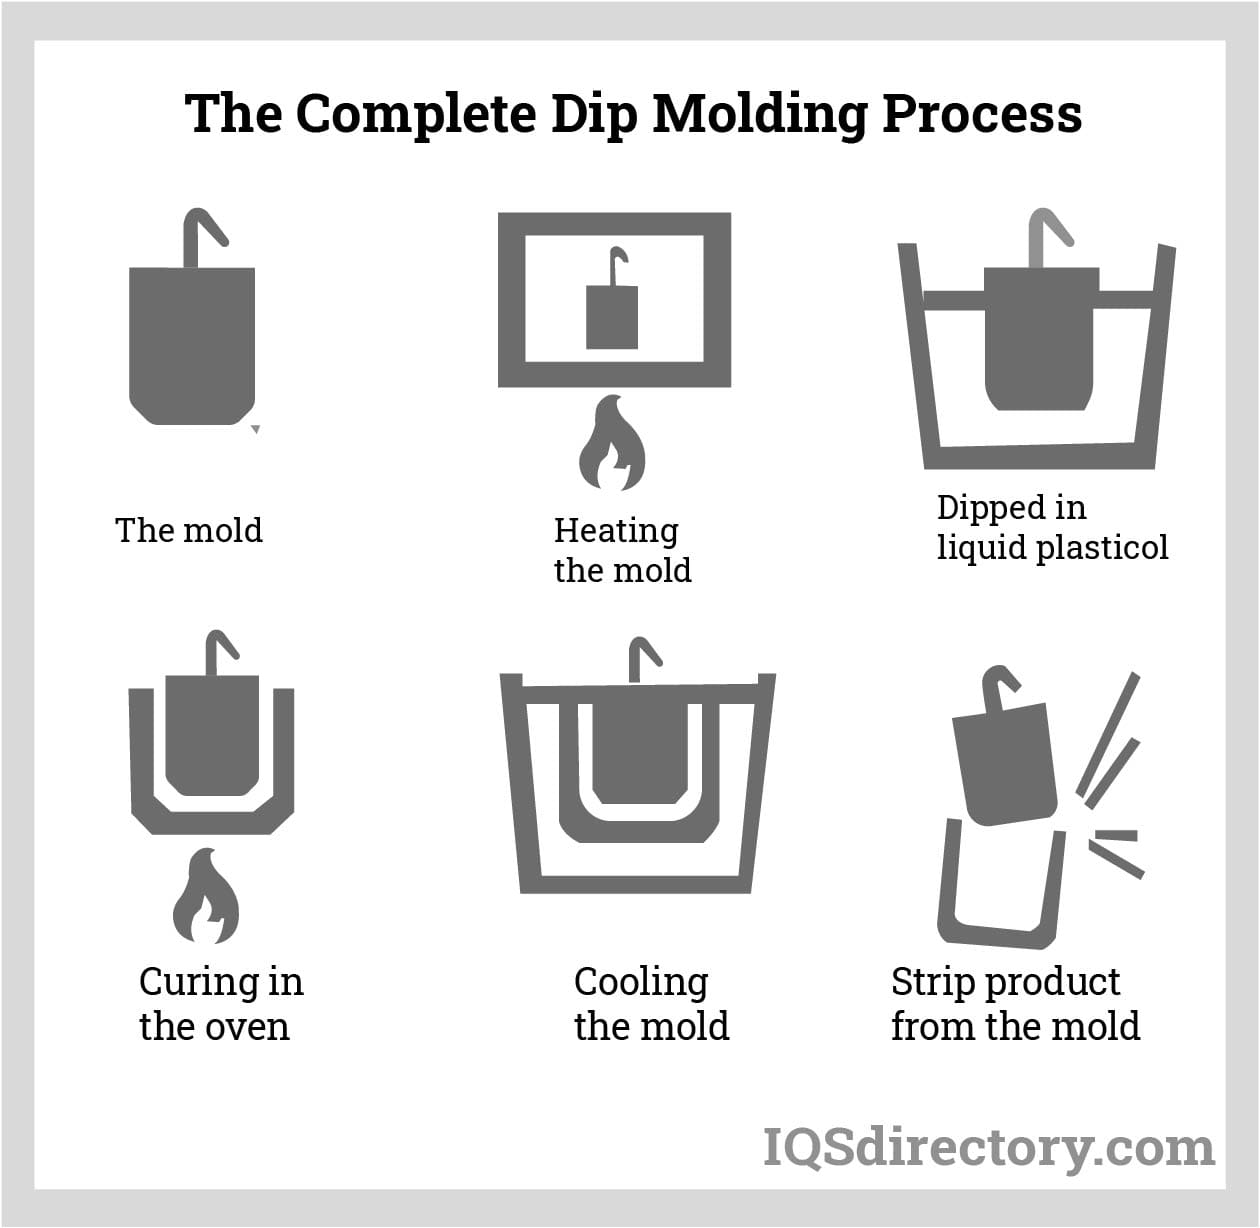 The Complete Dip Molding Process